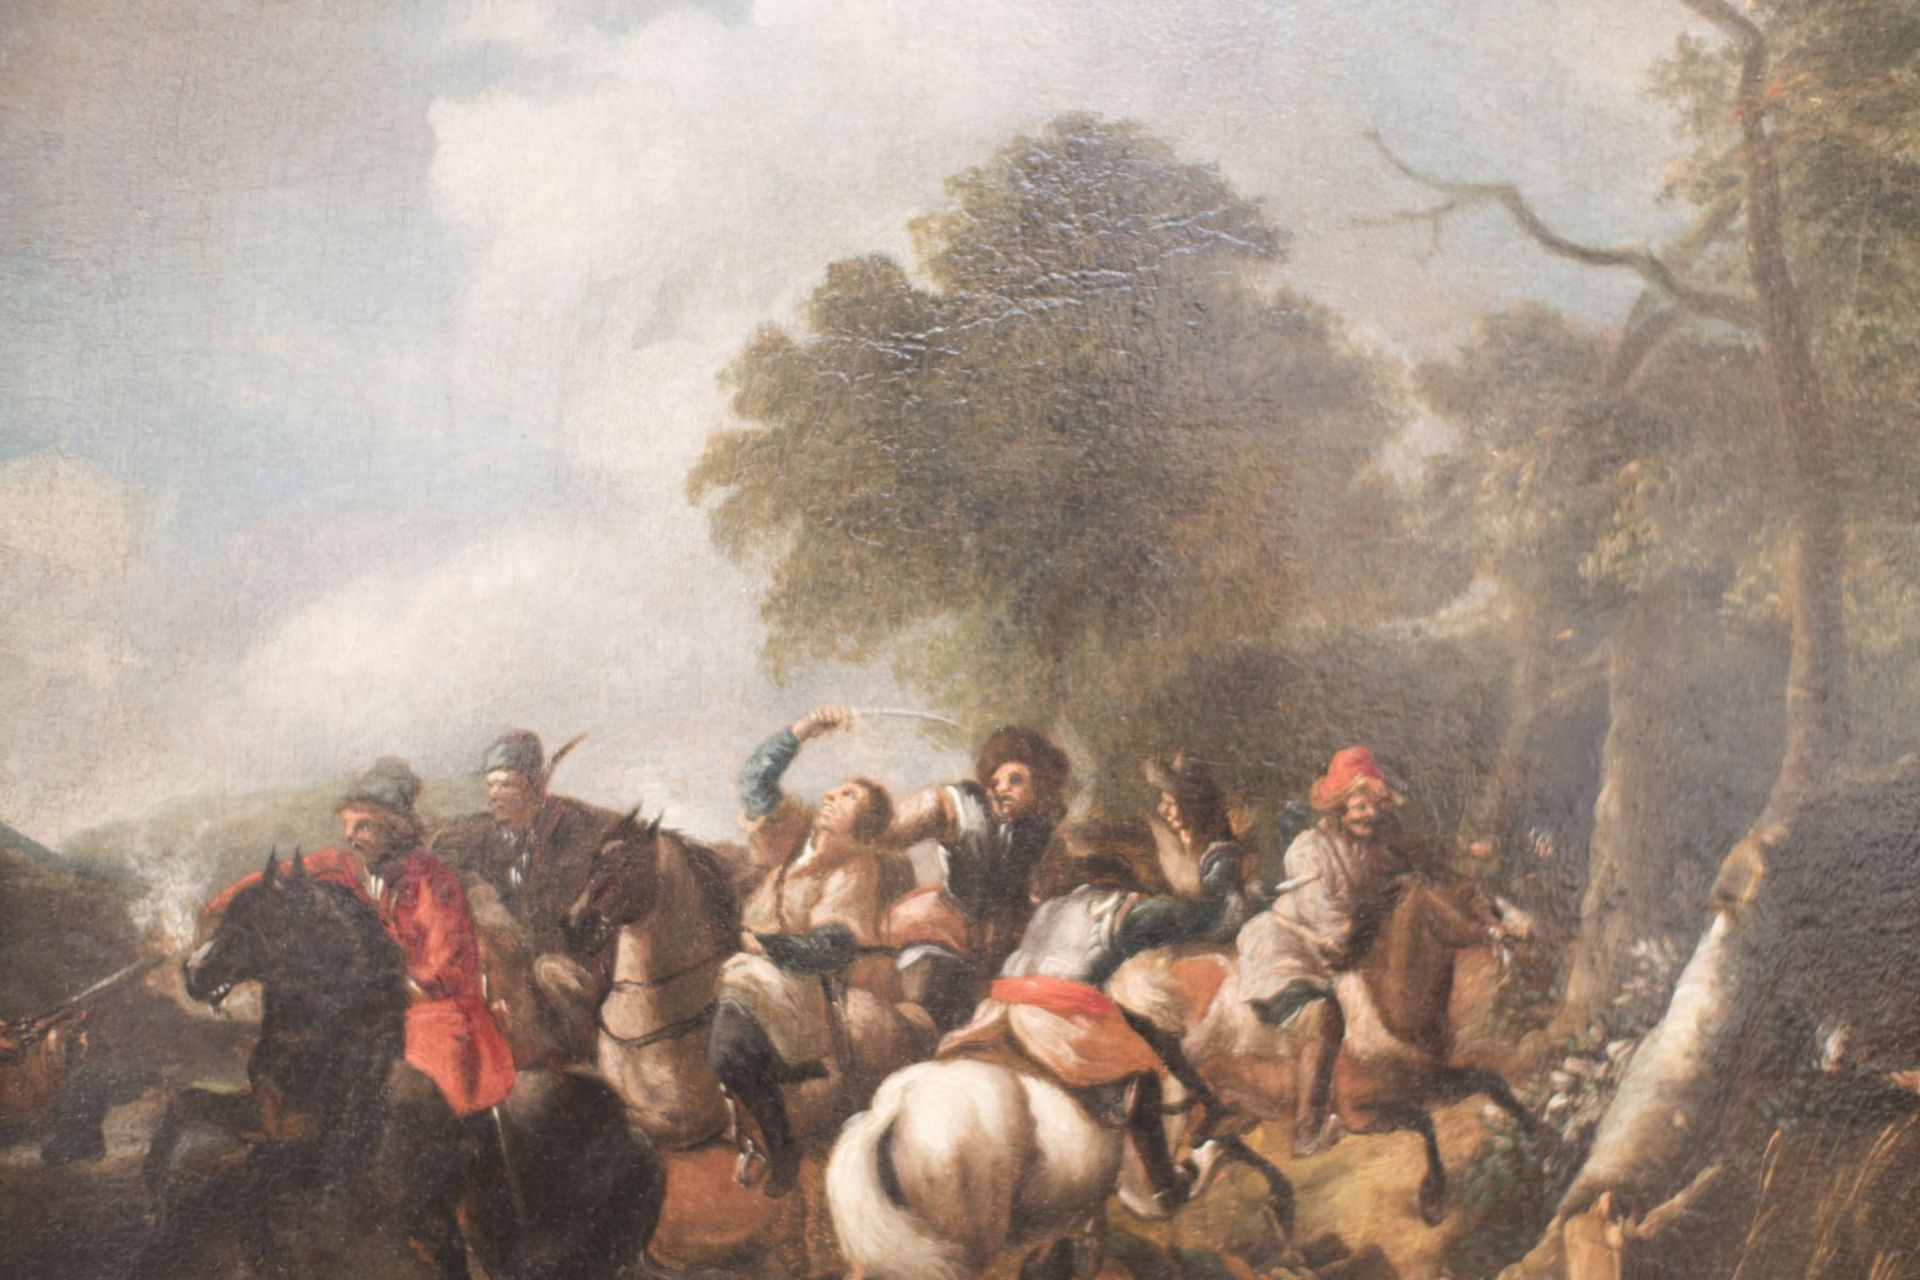 Painter of the 19th Century "Battle Scene with Horses" - Image 2 of 5